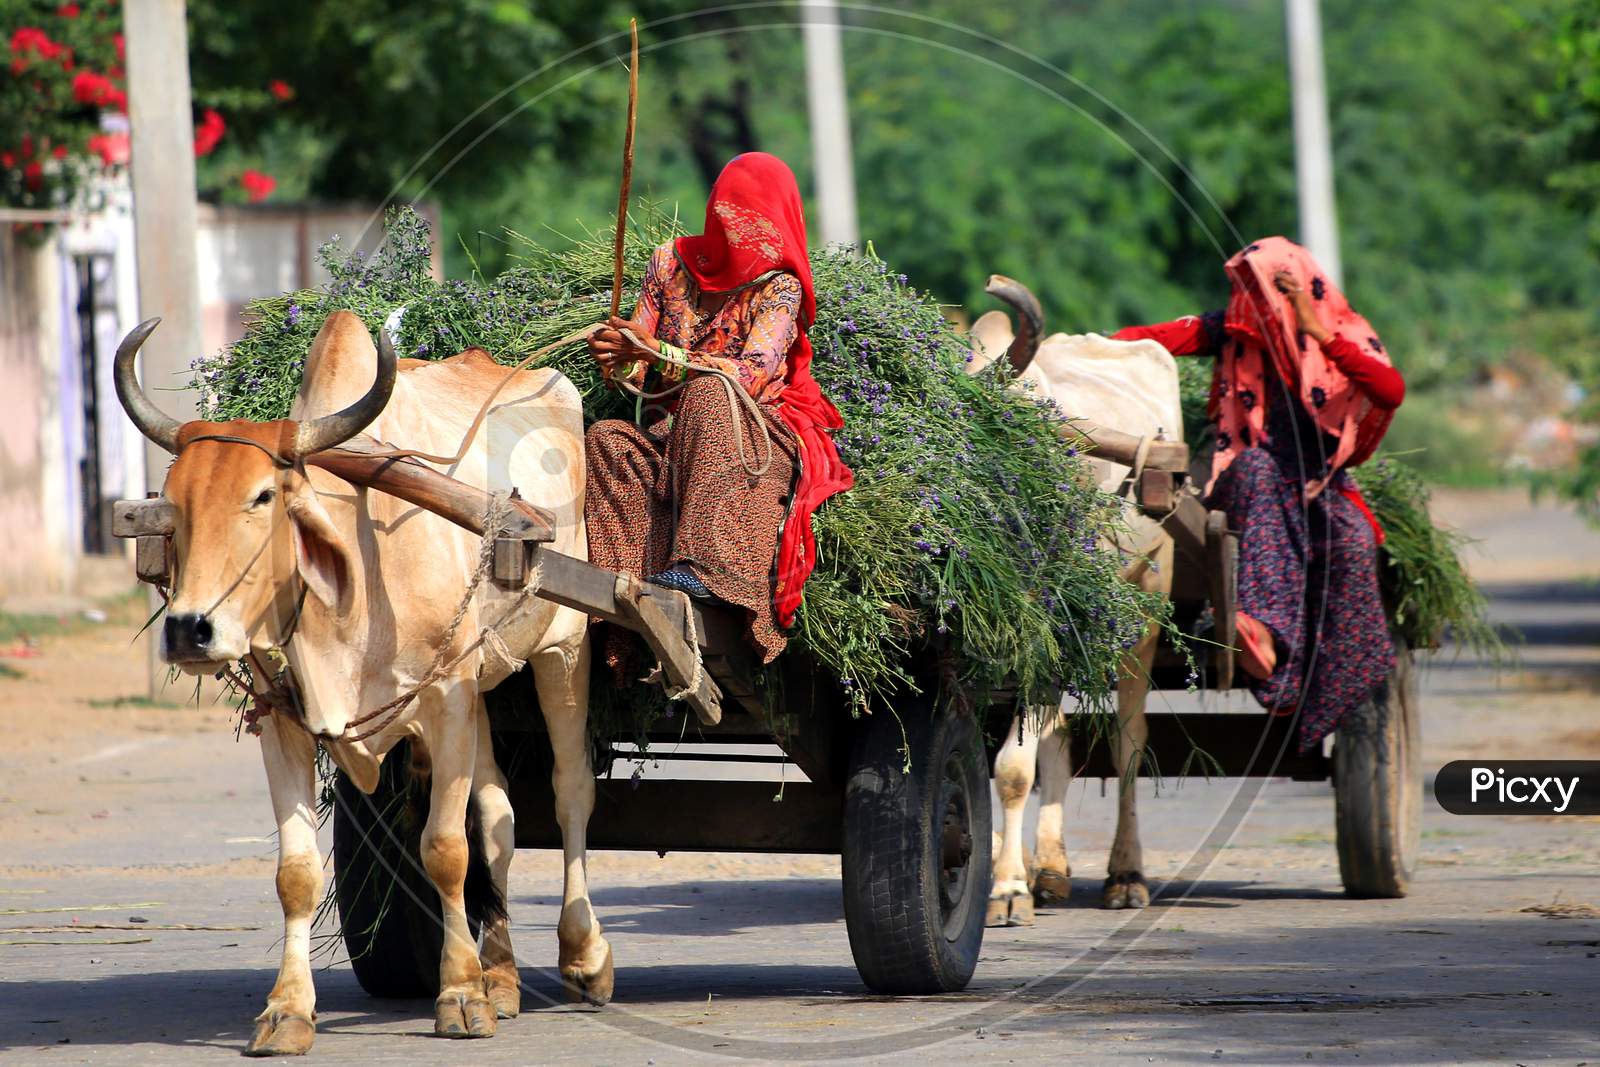 Indian Villager Returns From Agriculture Fields With Produce Carried On A Bullock Cart On The Outskirts Village Of Ajmer, Rajasthan, India On 14 July 2020